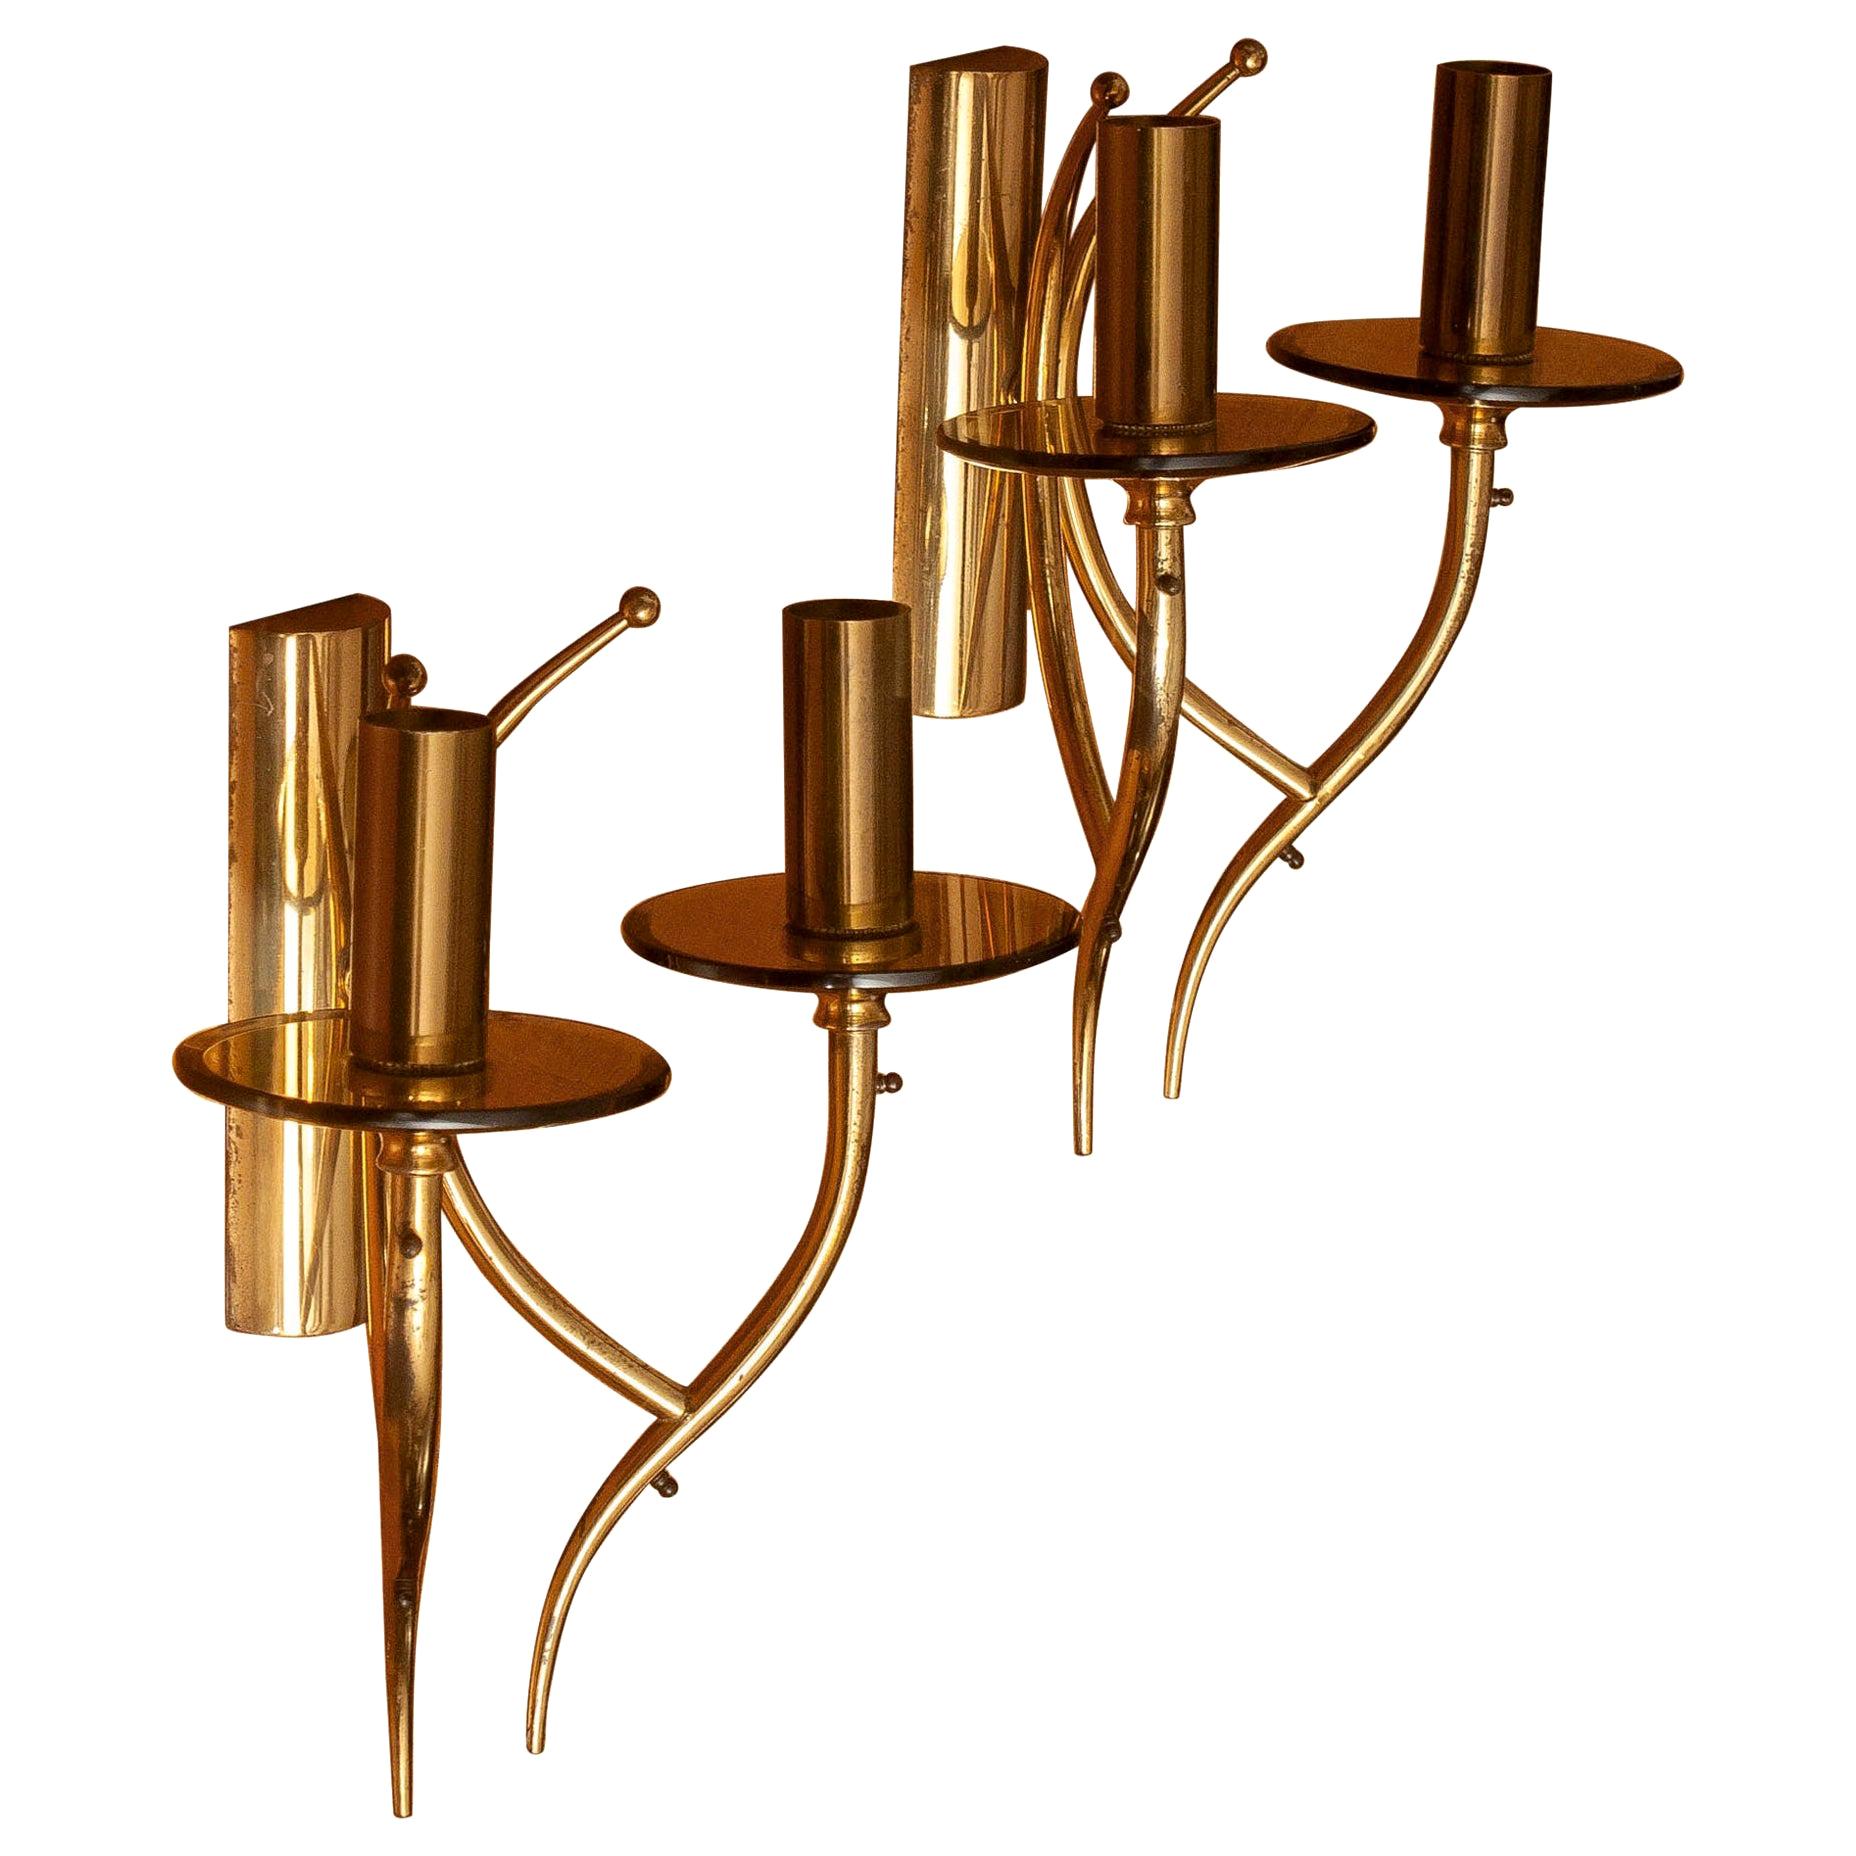 1960s, Pair of Brass and Smoked Glass Wall Lights / Scones, Italy